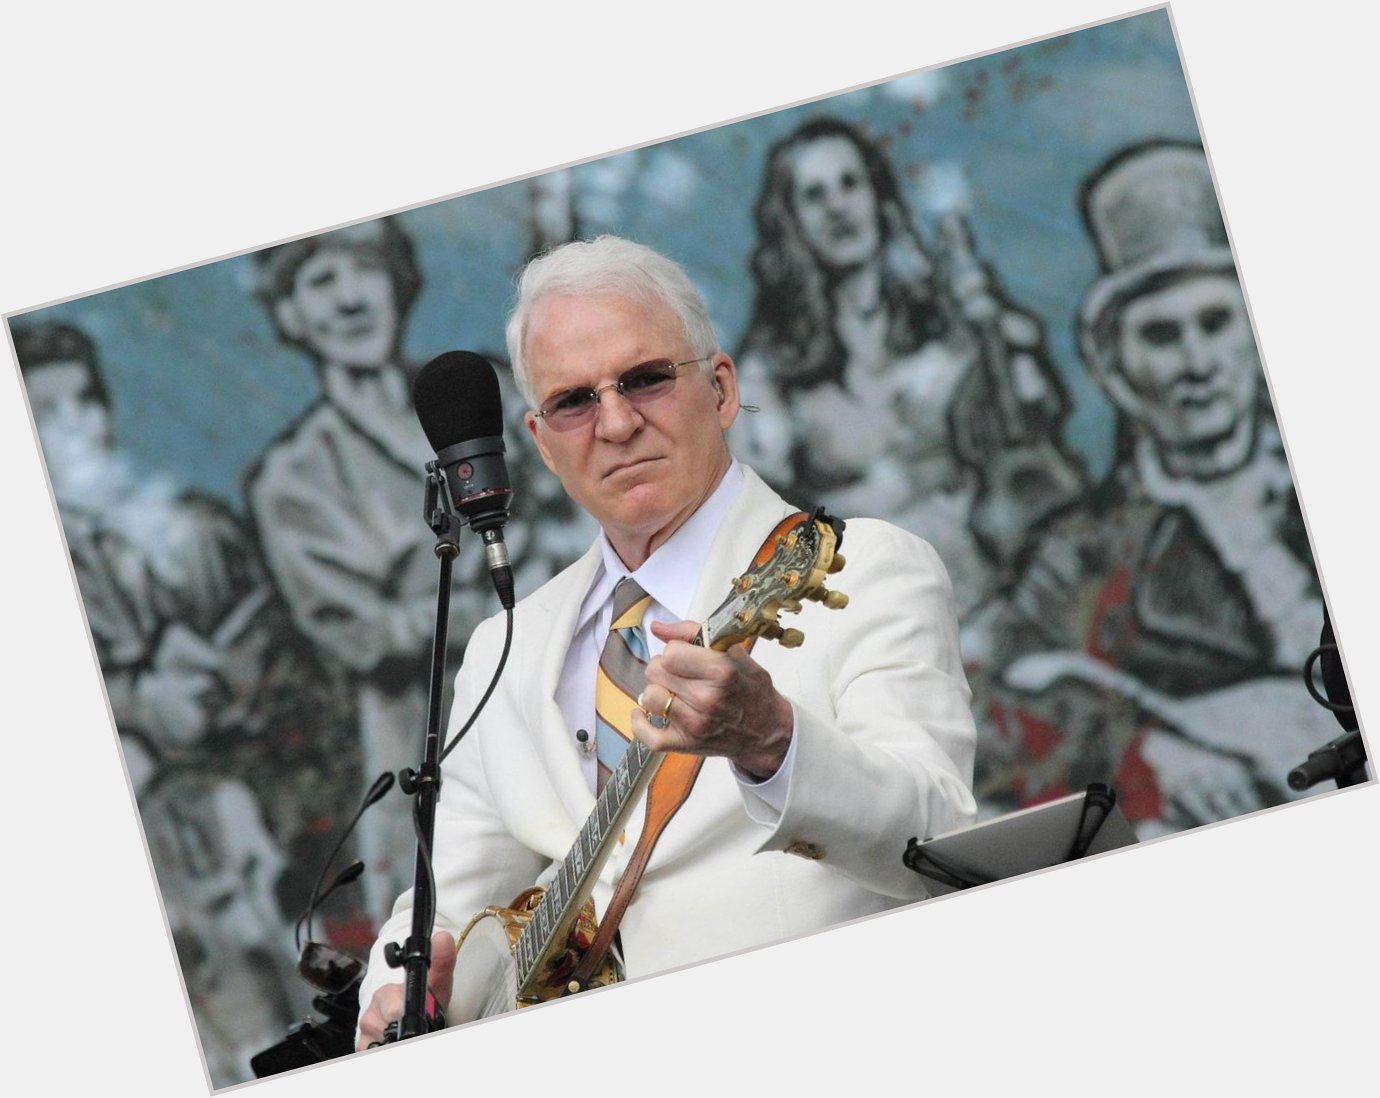 Happy Birthday Steve Martin, August 14,1945
Here he is at the San Francisco 2013 Hardly Strictly Bluegrass Festival! 